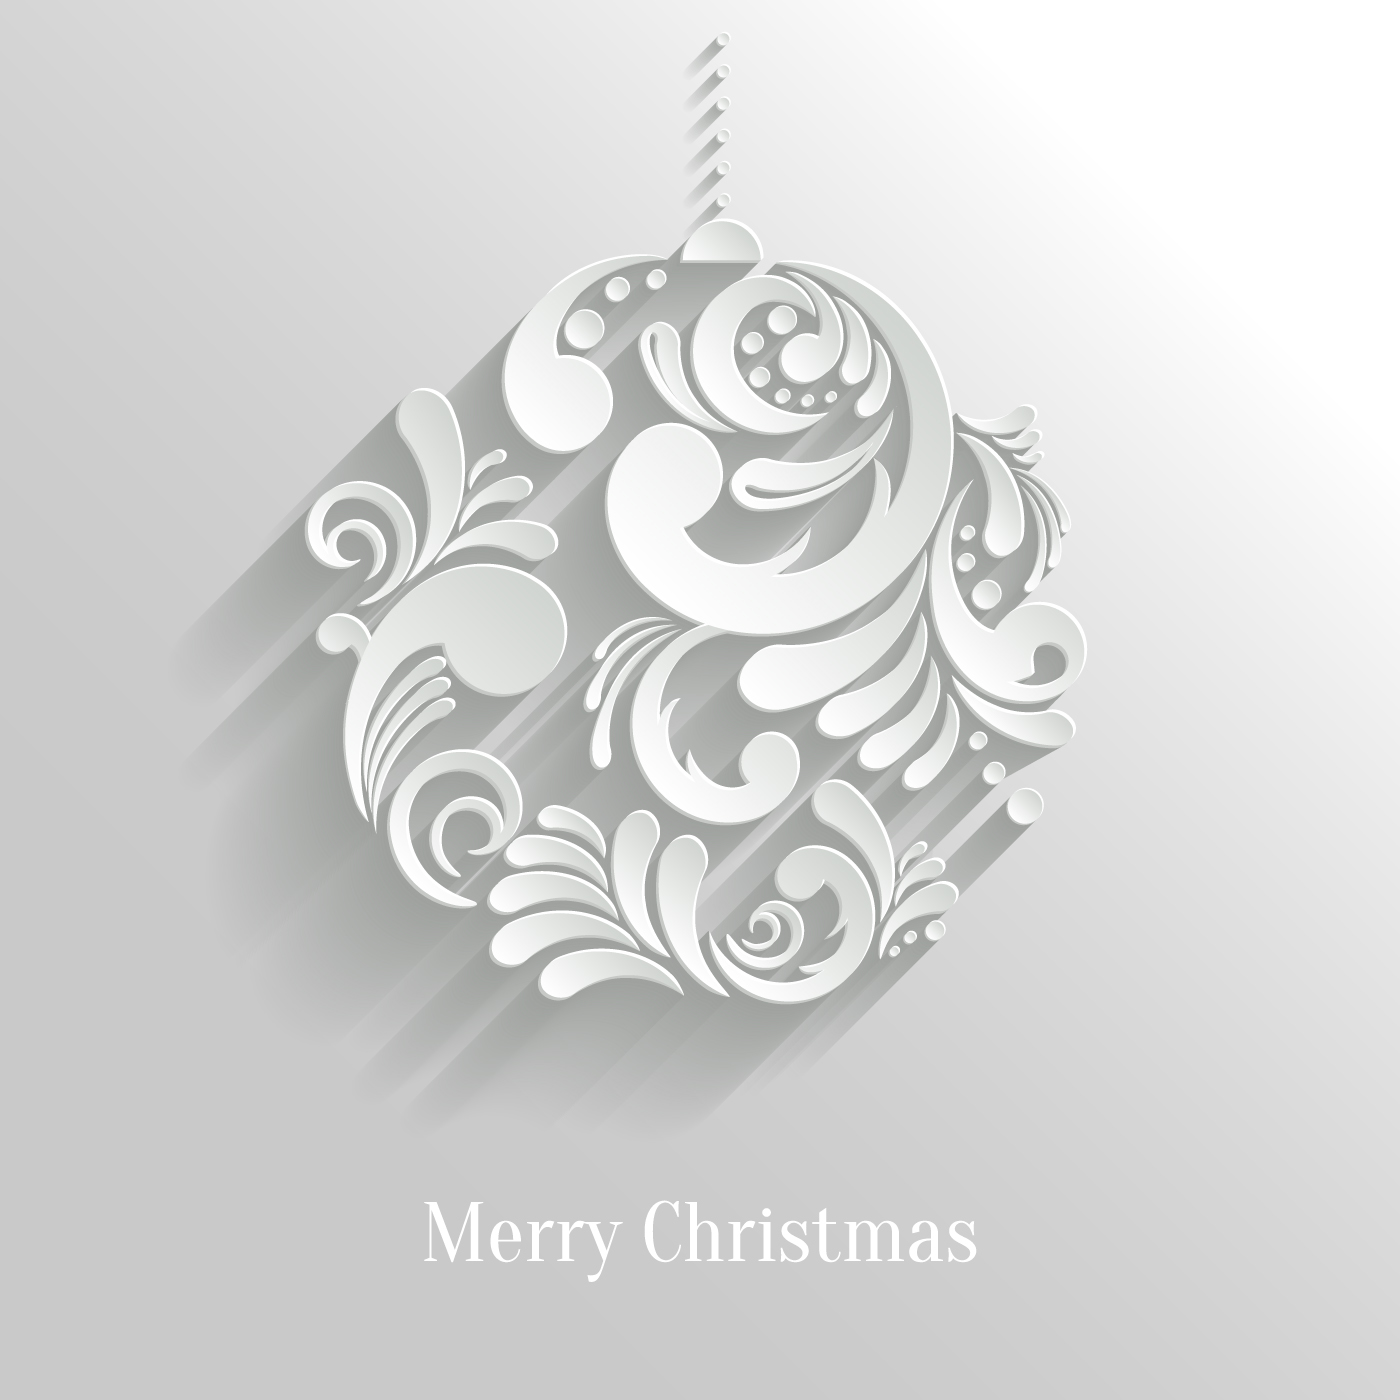 Paper Floral White Christmas Backgrounds Vector 02  